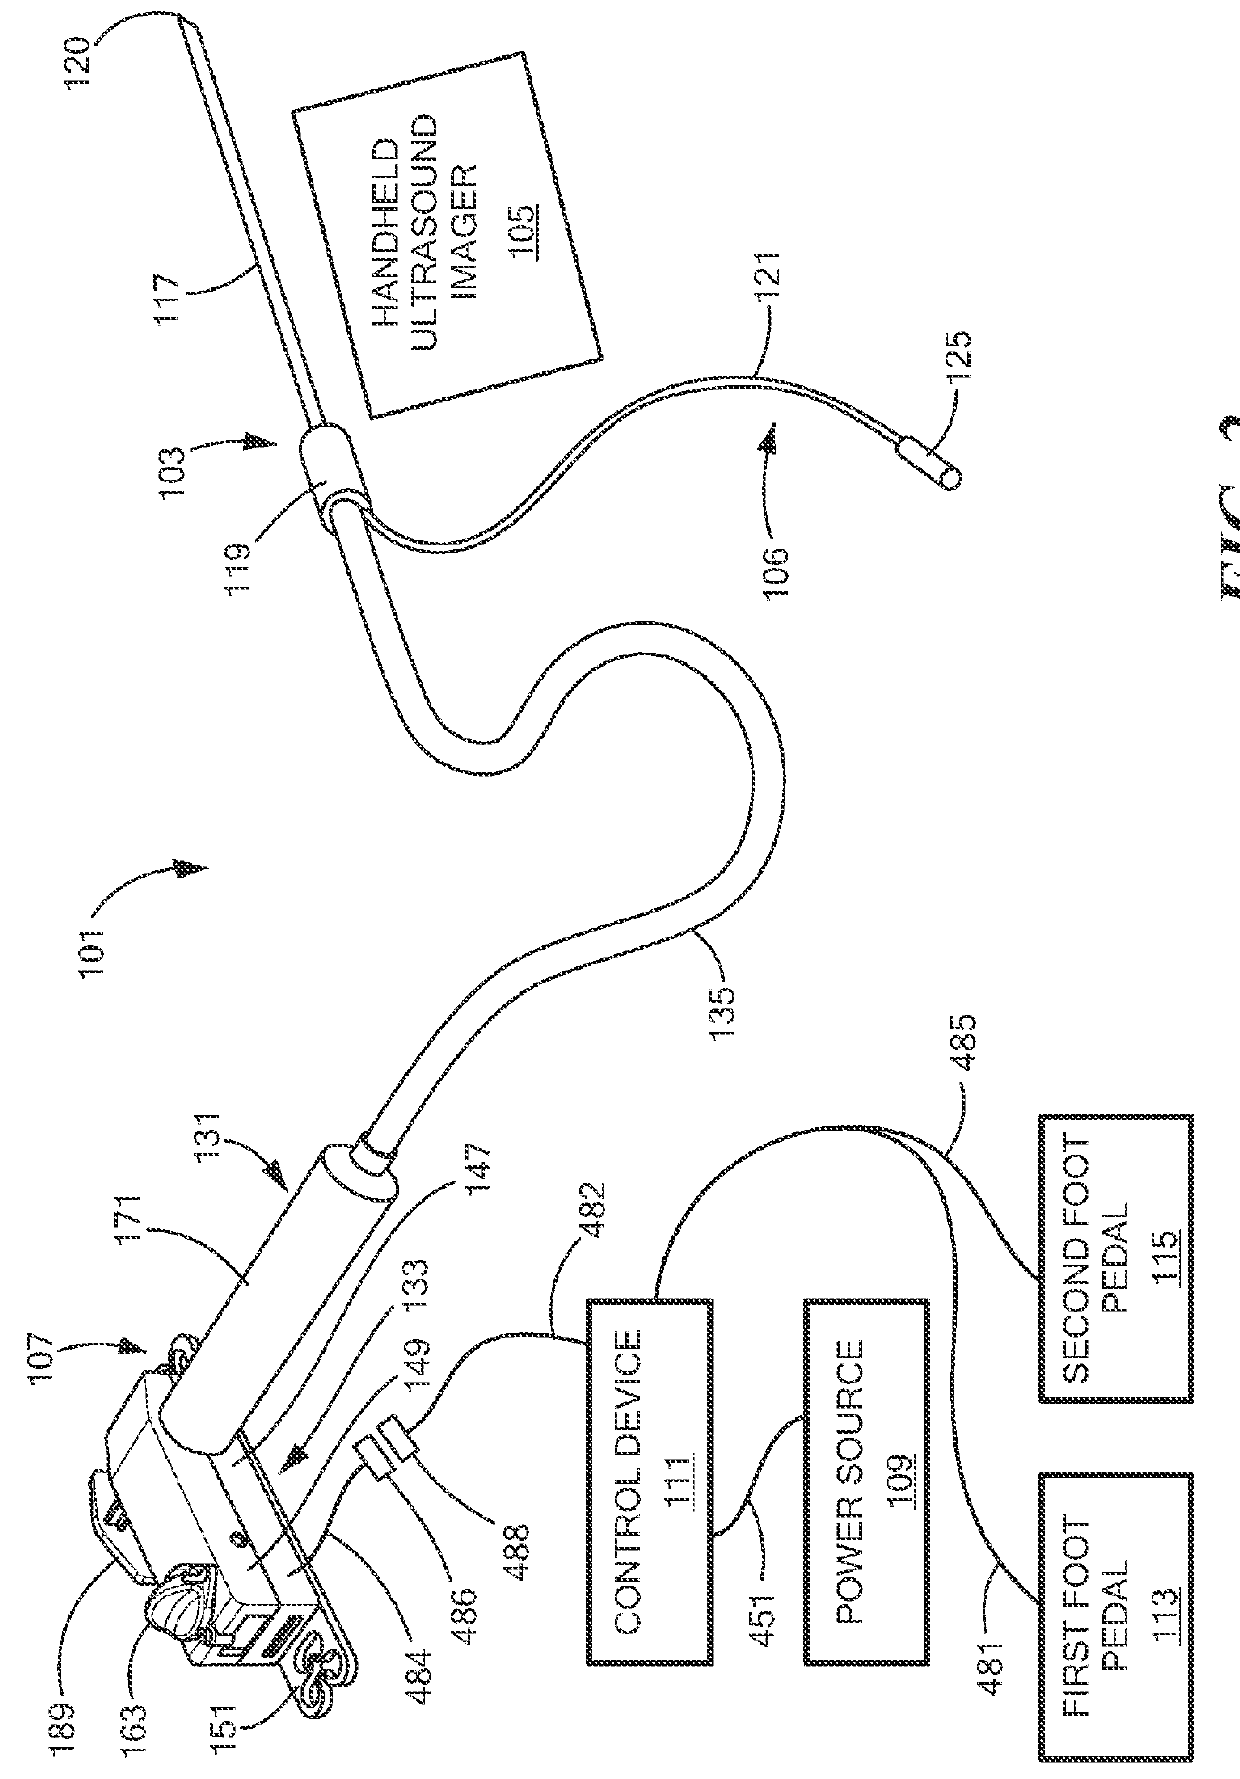 Method and system for controllably administering fluid to a patient and/or for controllably withdrawing fluid from the patient